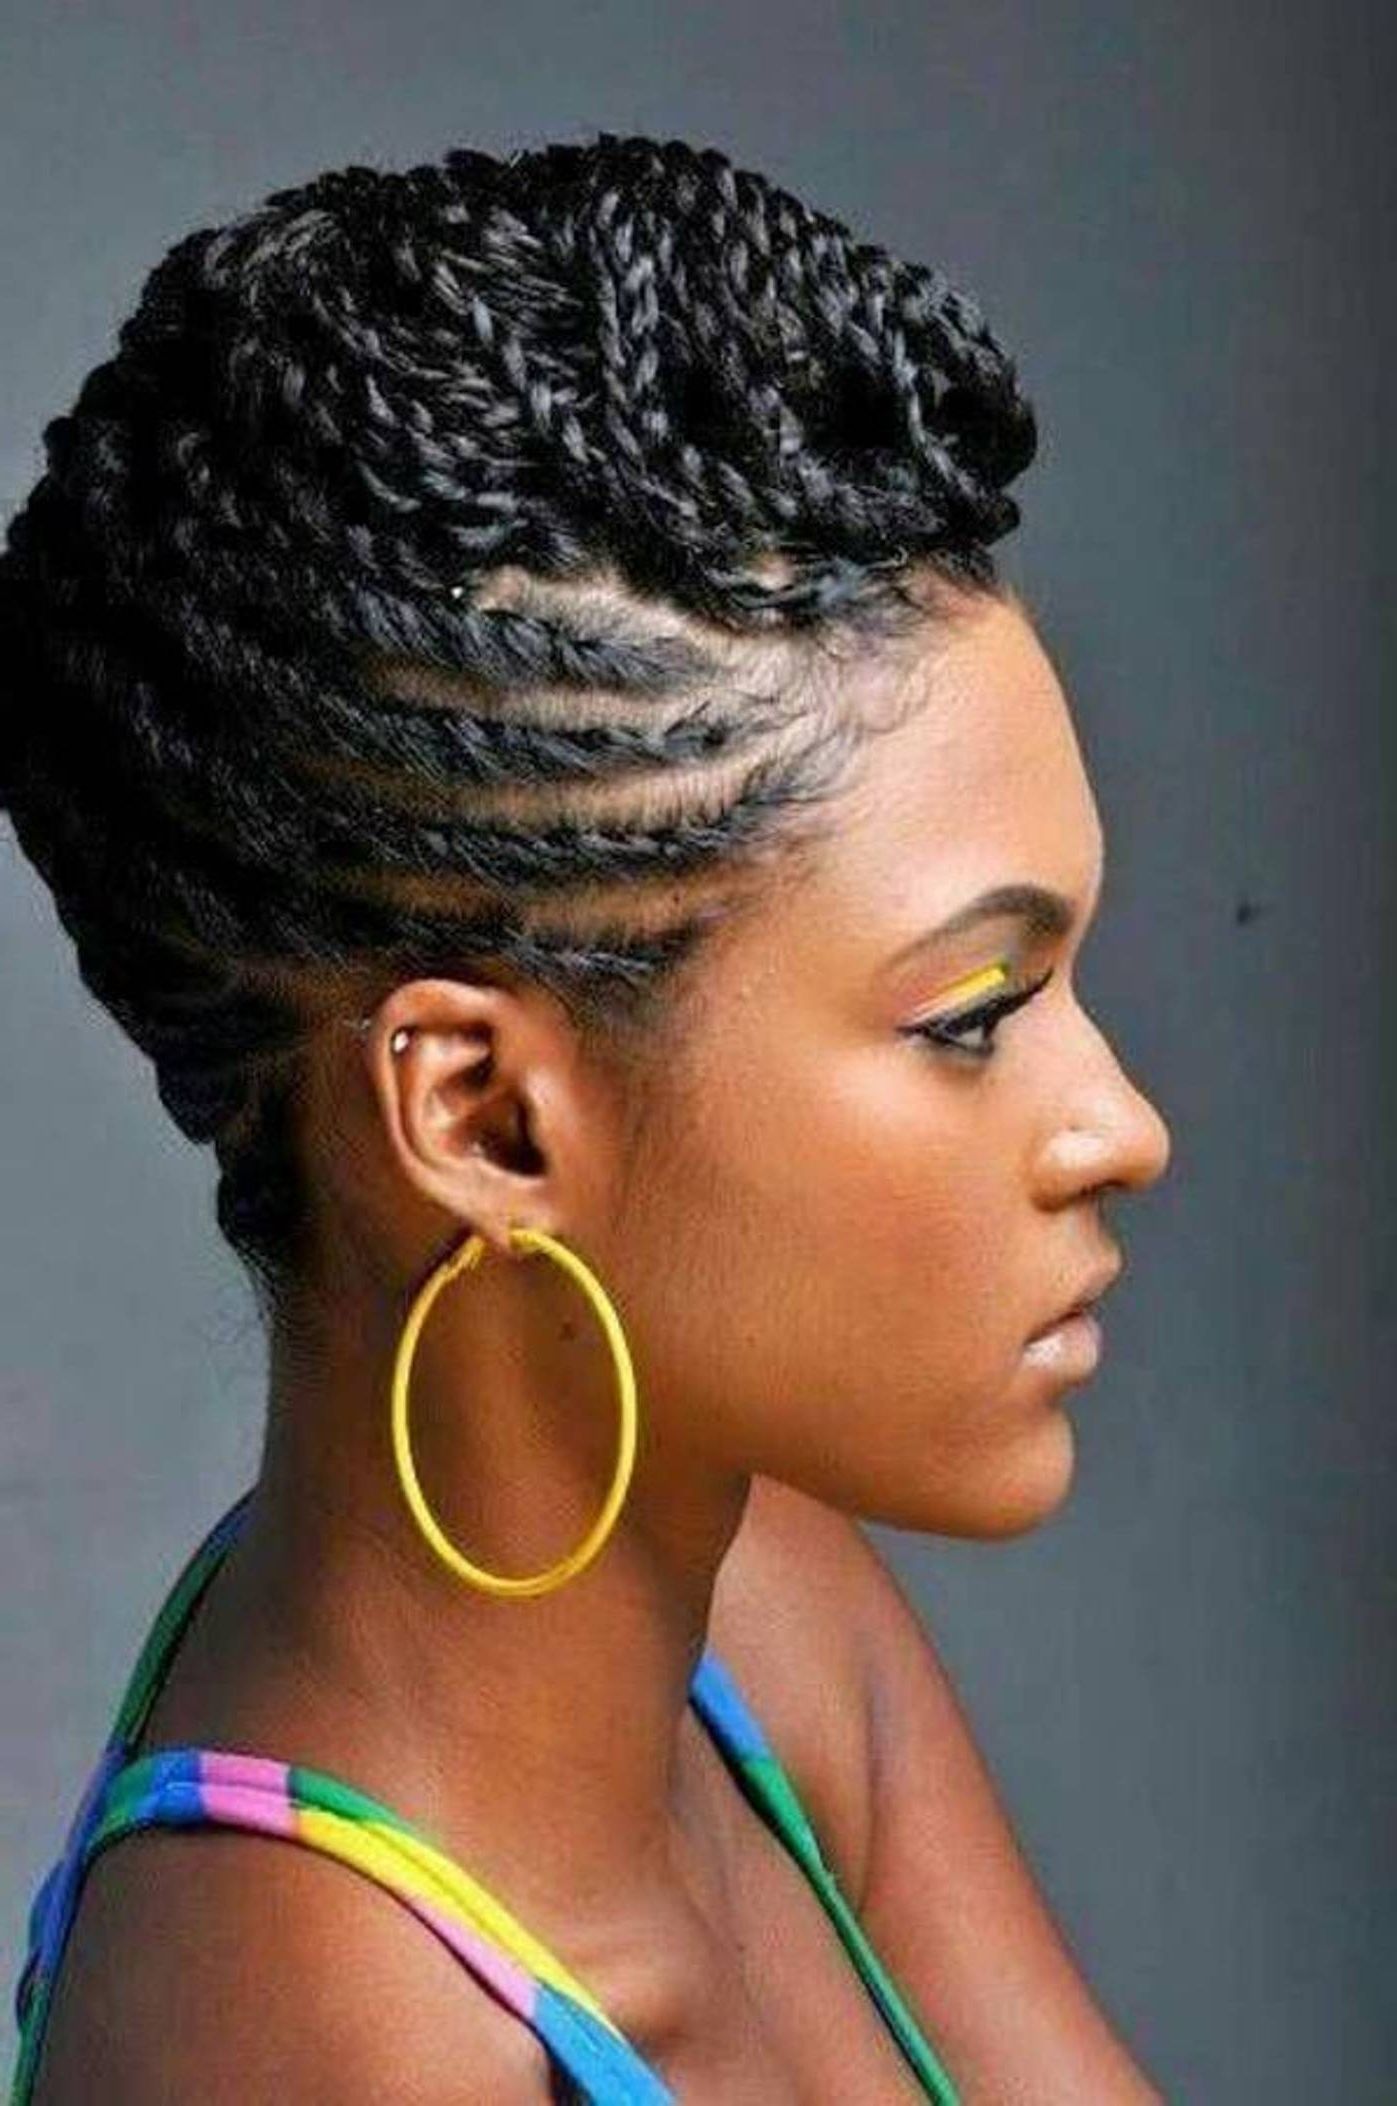 25 Updo Hairstyles For Black Women Throughout Popular Braided Hairstyles For Older Ladies (View 13 of 15)